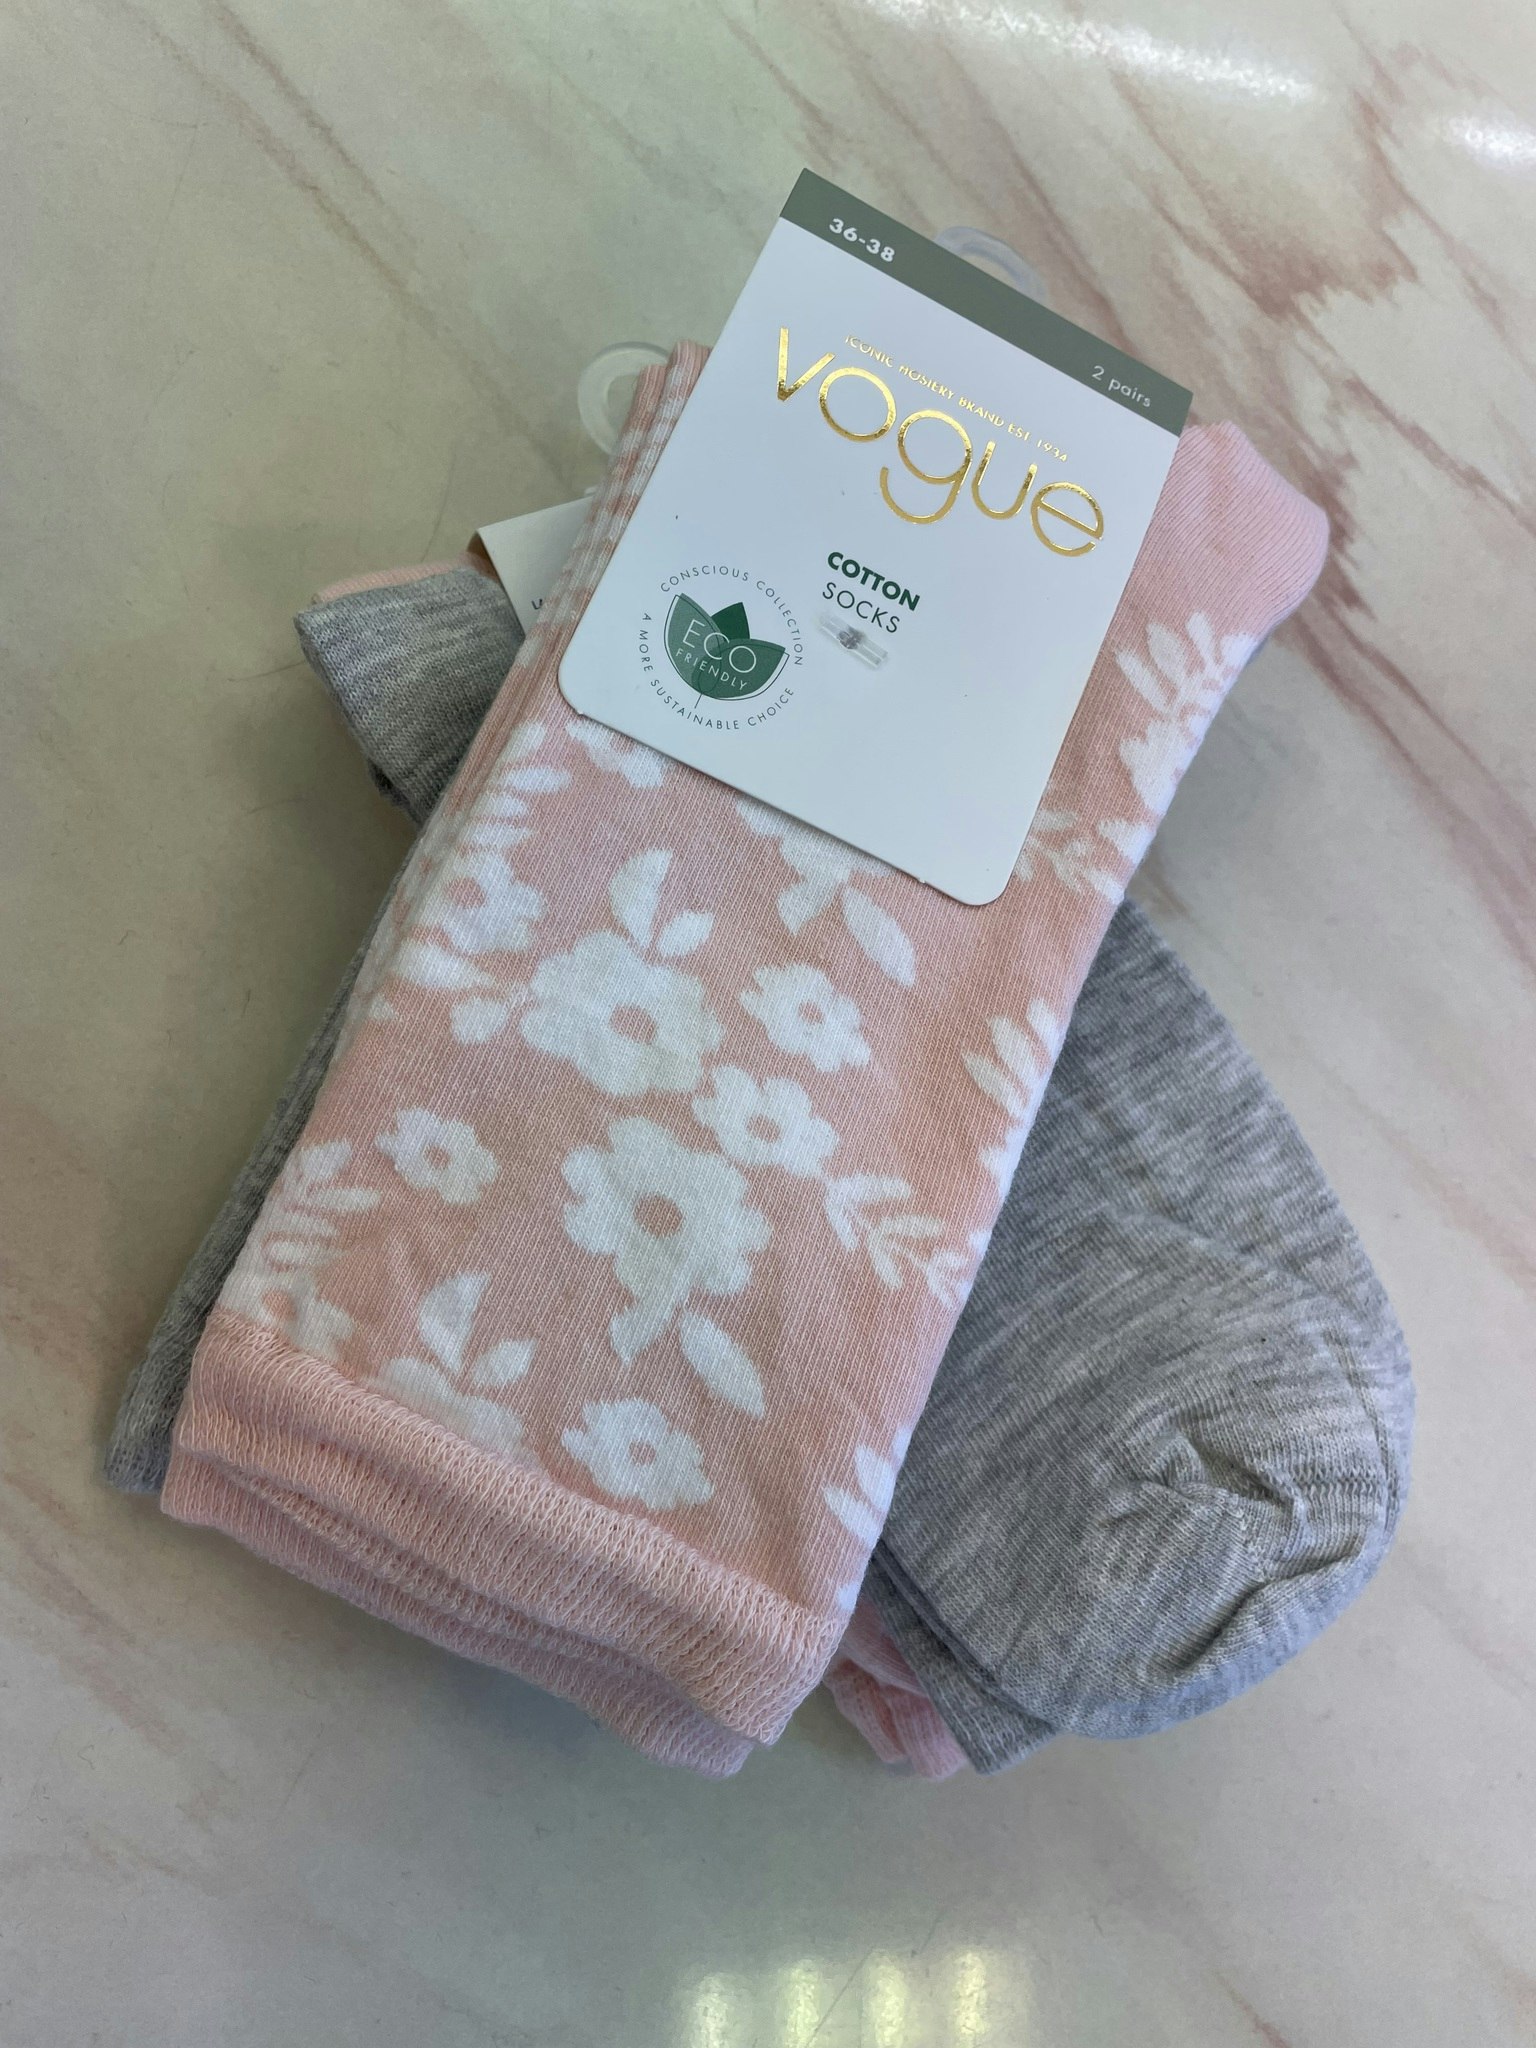 Vogue bomull ankelsocka 2-pack 96387 / 6226 dusty pink/grå